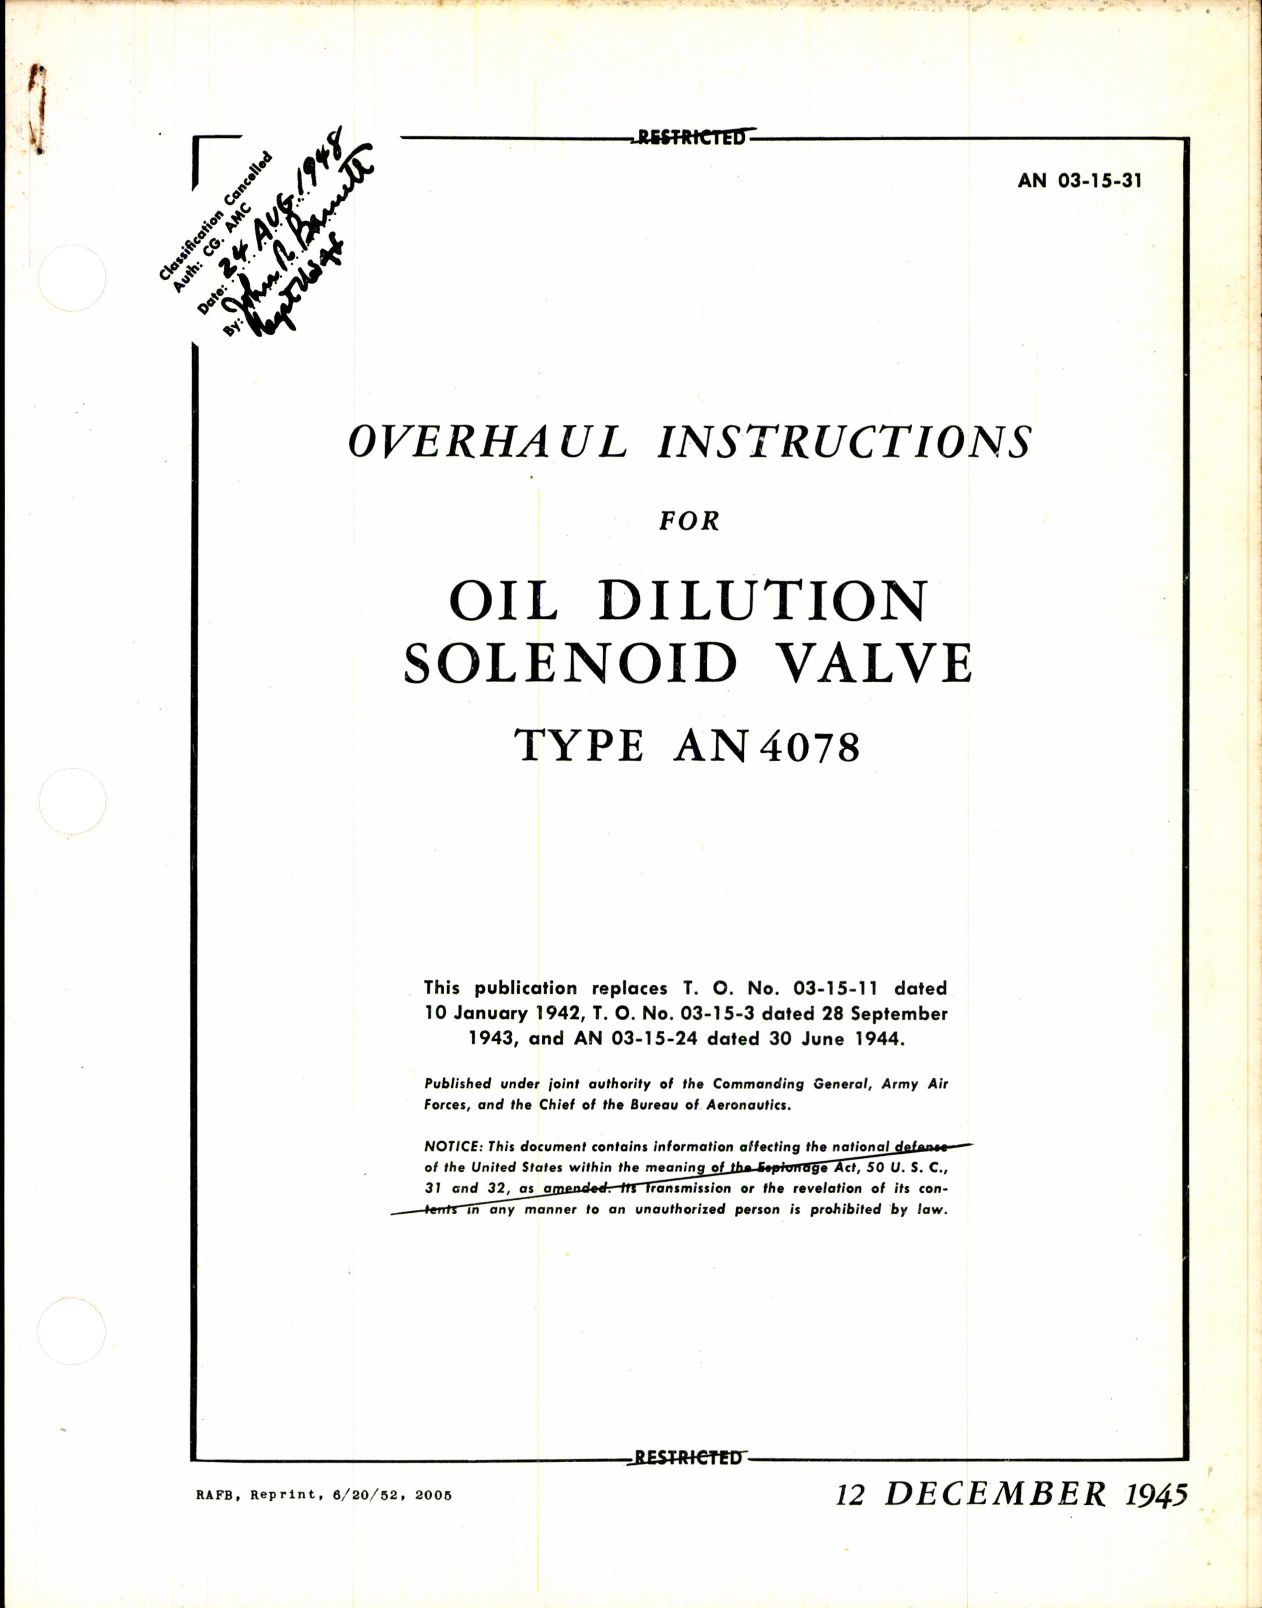 Sample page 1 from AirCorps Library document: Instructions for Oil Dilution Solenoid Valve Type AN 4078 